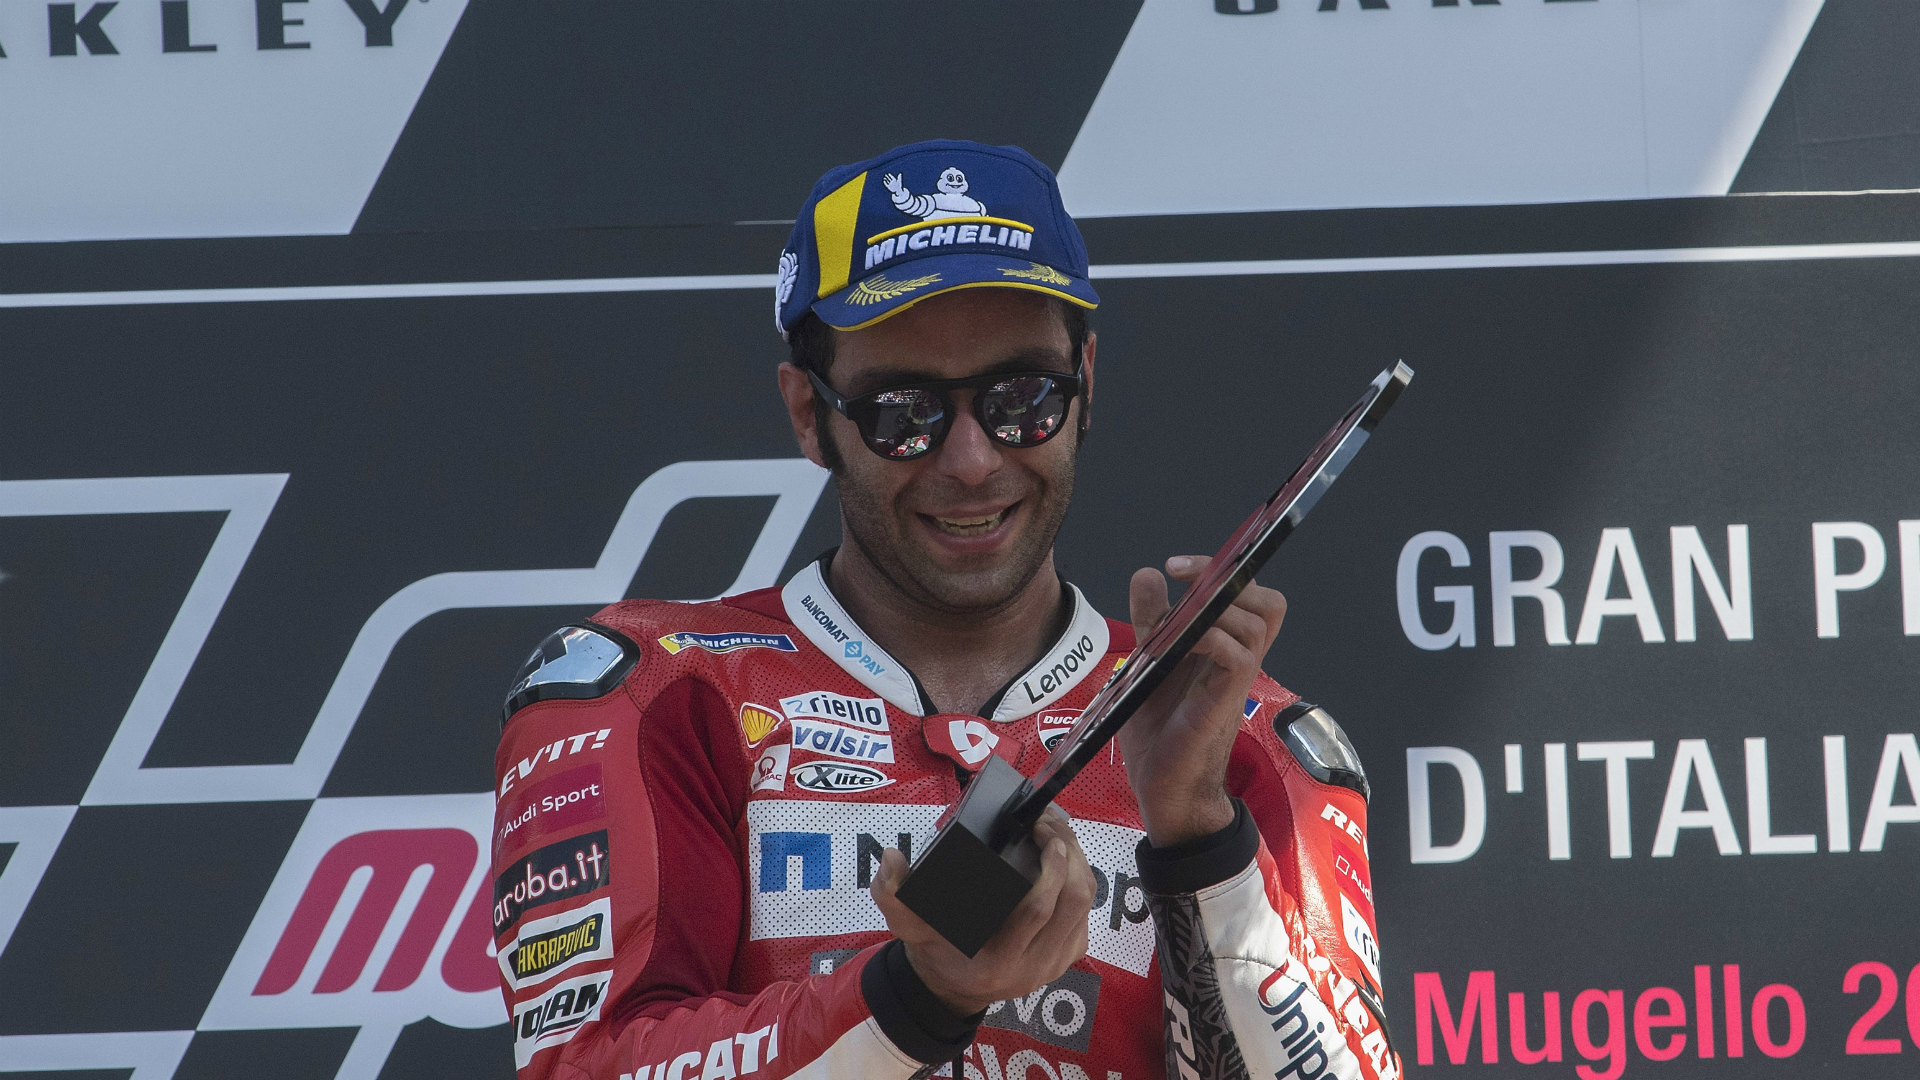 Danilo Petrucci ended a near eight-year wait for a MotoGP victory and will aim to build on his Italian win at the Catalunya Grand Prix.